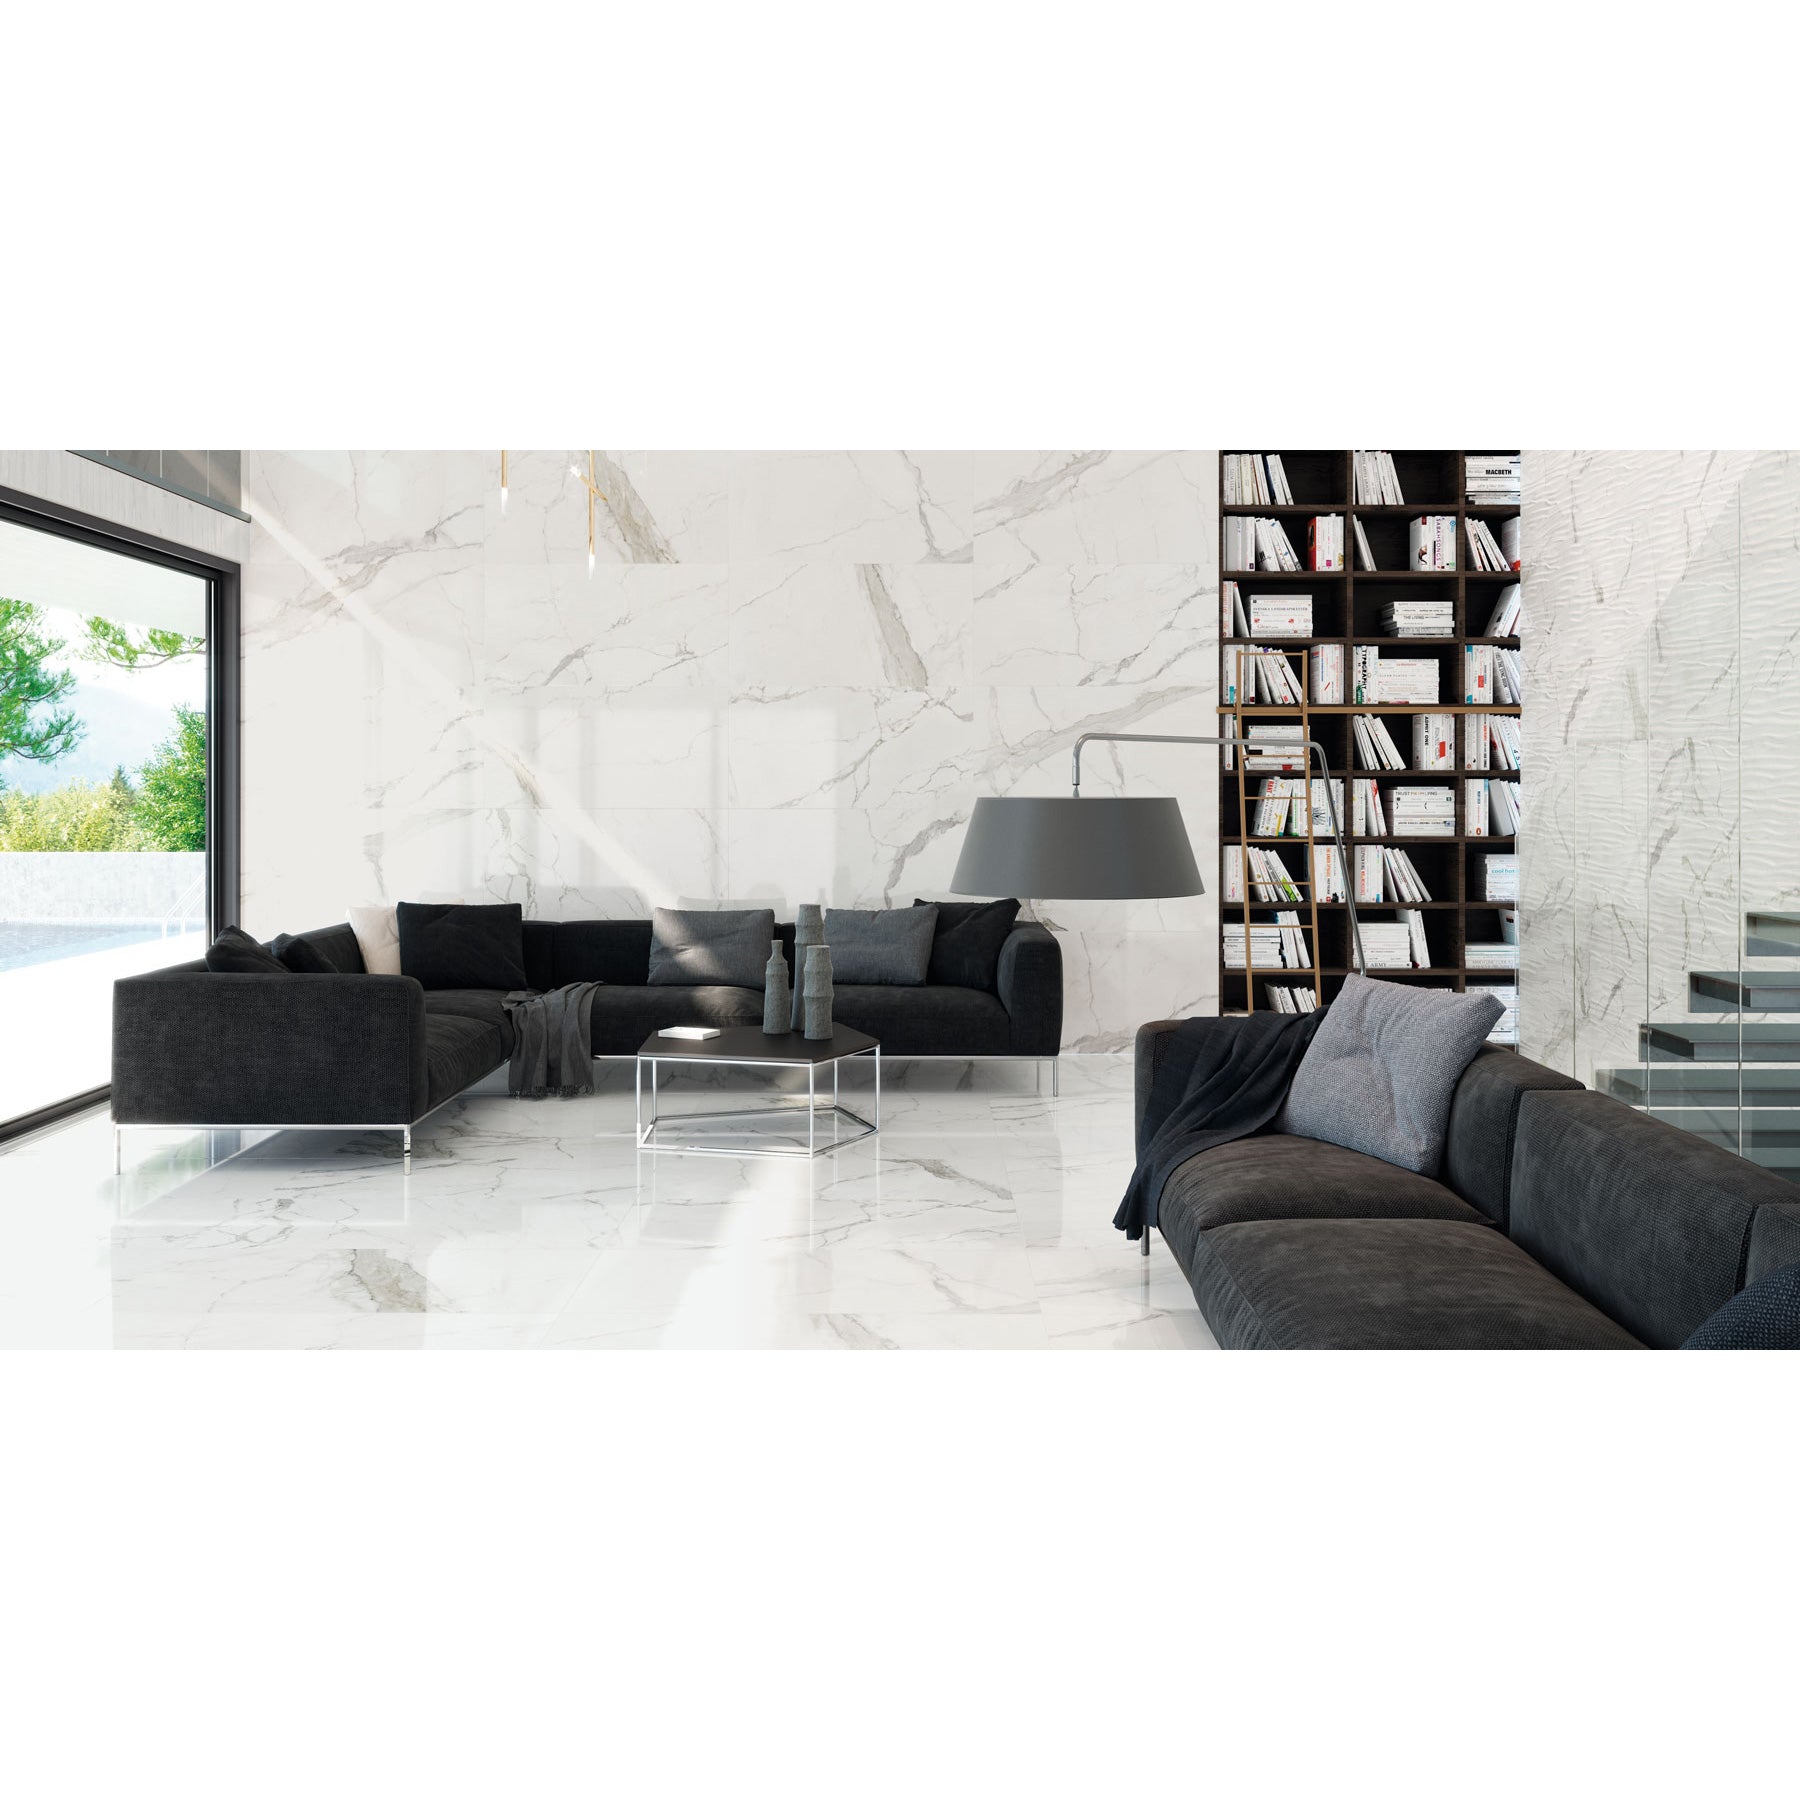 Happy Floors - Statuario 12 in. x 36 in. Rectified Porcelain Wall Tile - (Glossy)